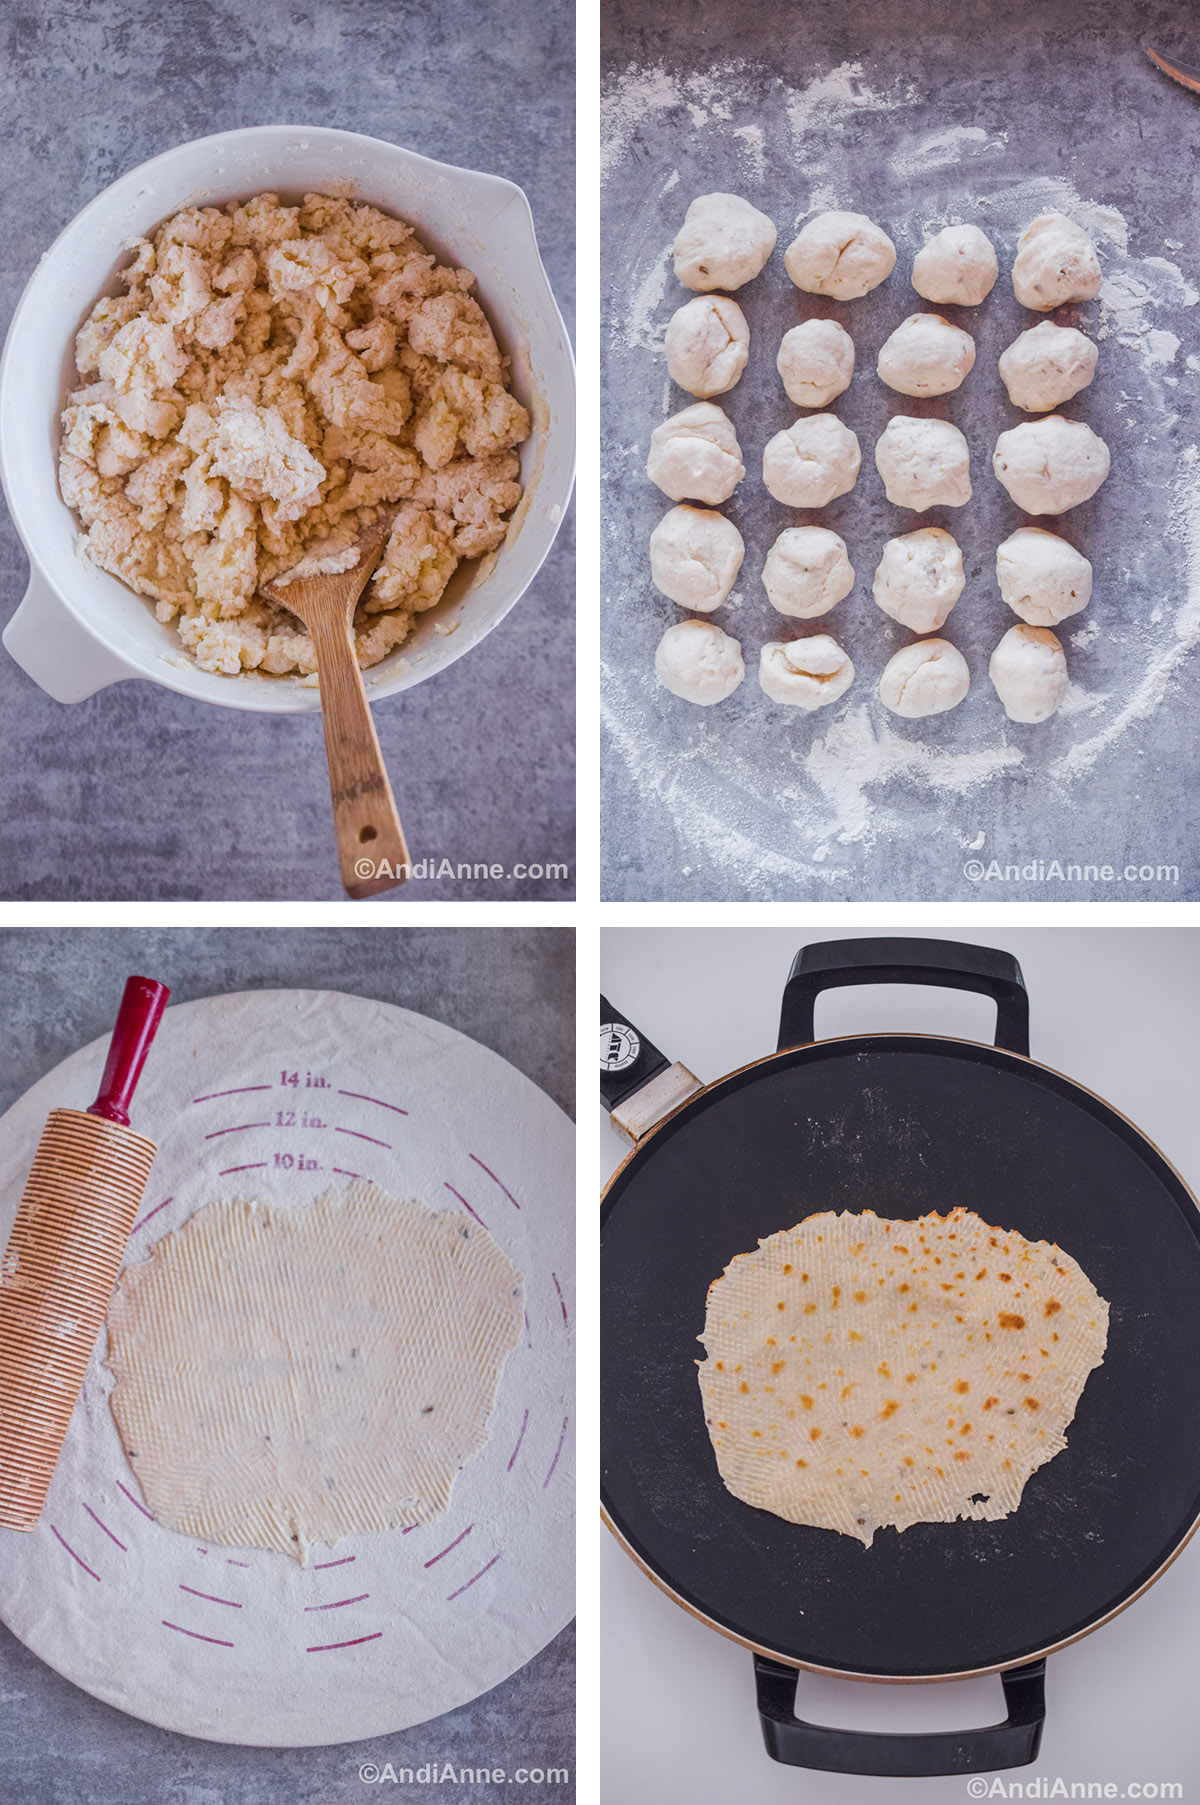 Four images showing steps to make recipe including bowl of dough. Round dough pieces in rows on floured countertop. Rolled out thin dough on canvas board with rolling pin. Cooked lefse on a black electric griddle.